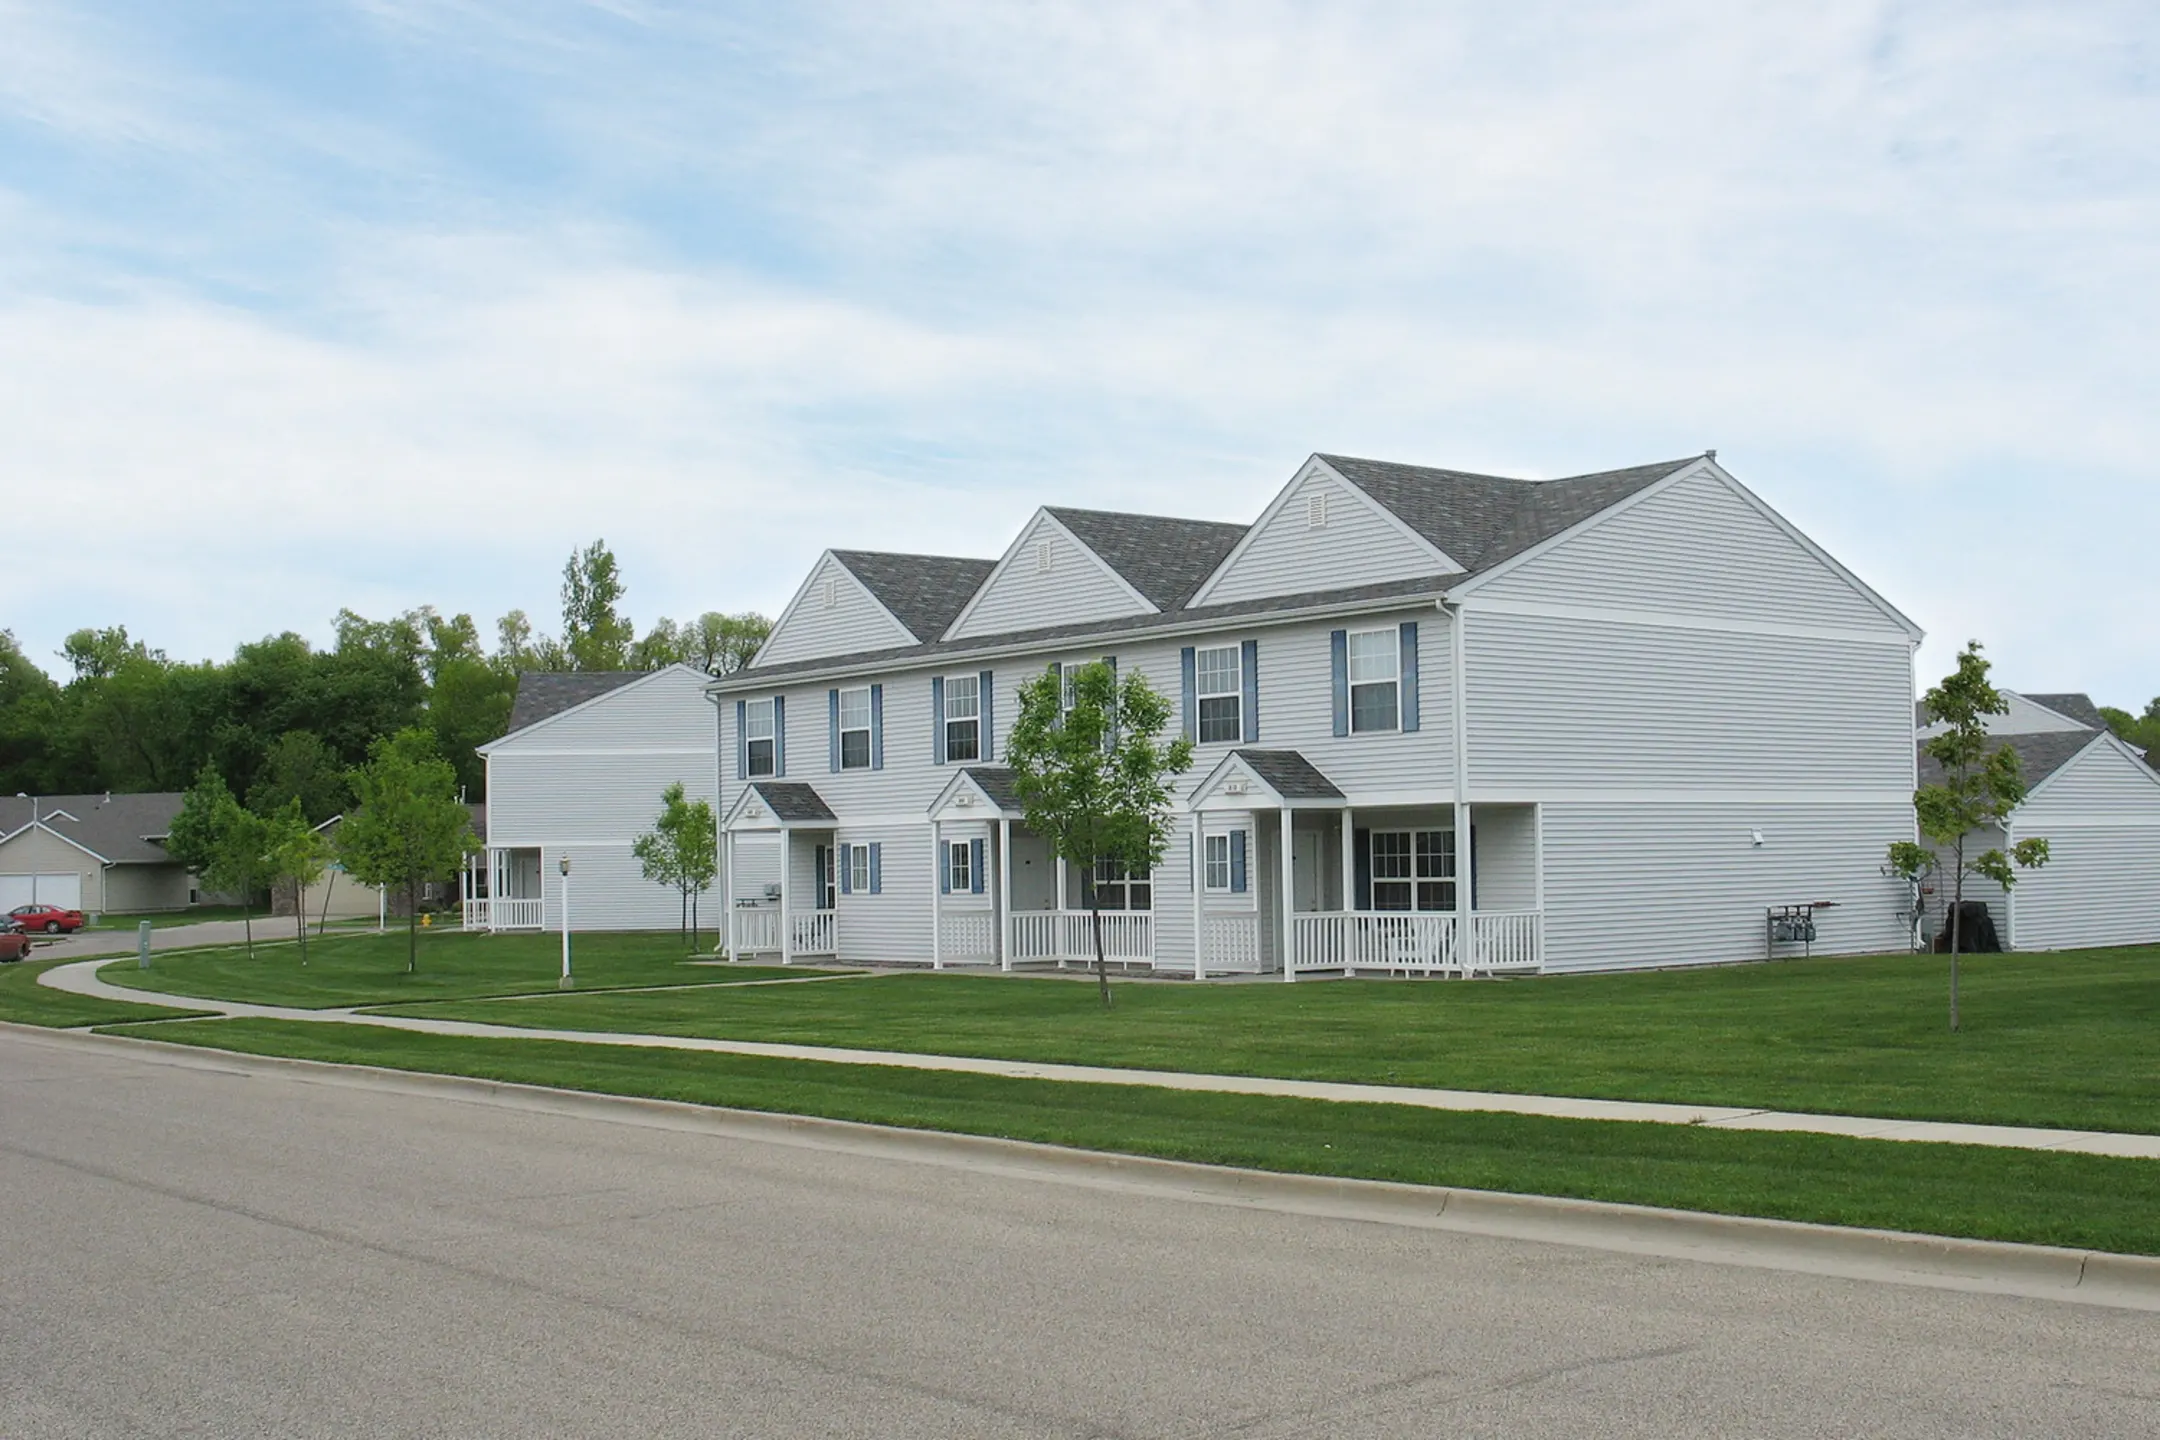 Building - The Gables Townhomes - Sioux Falls, SD